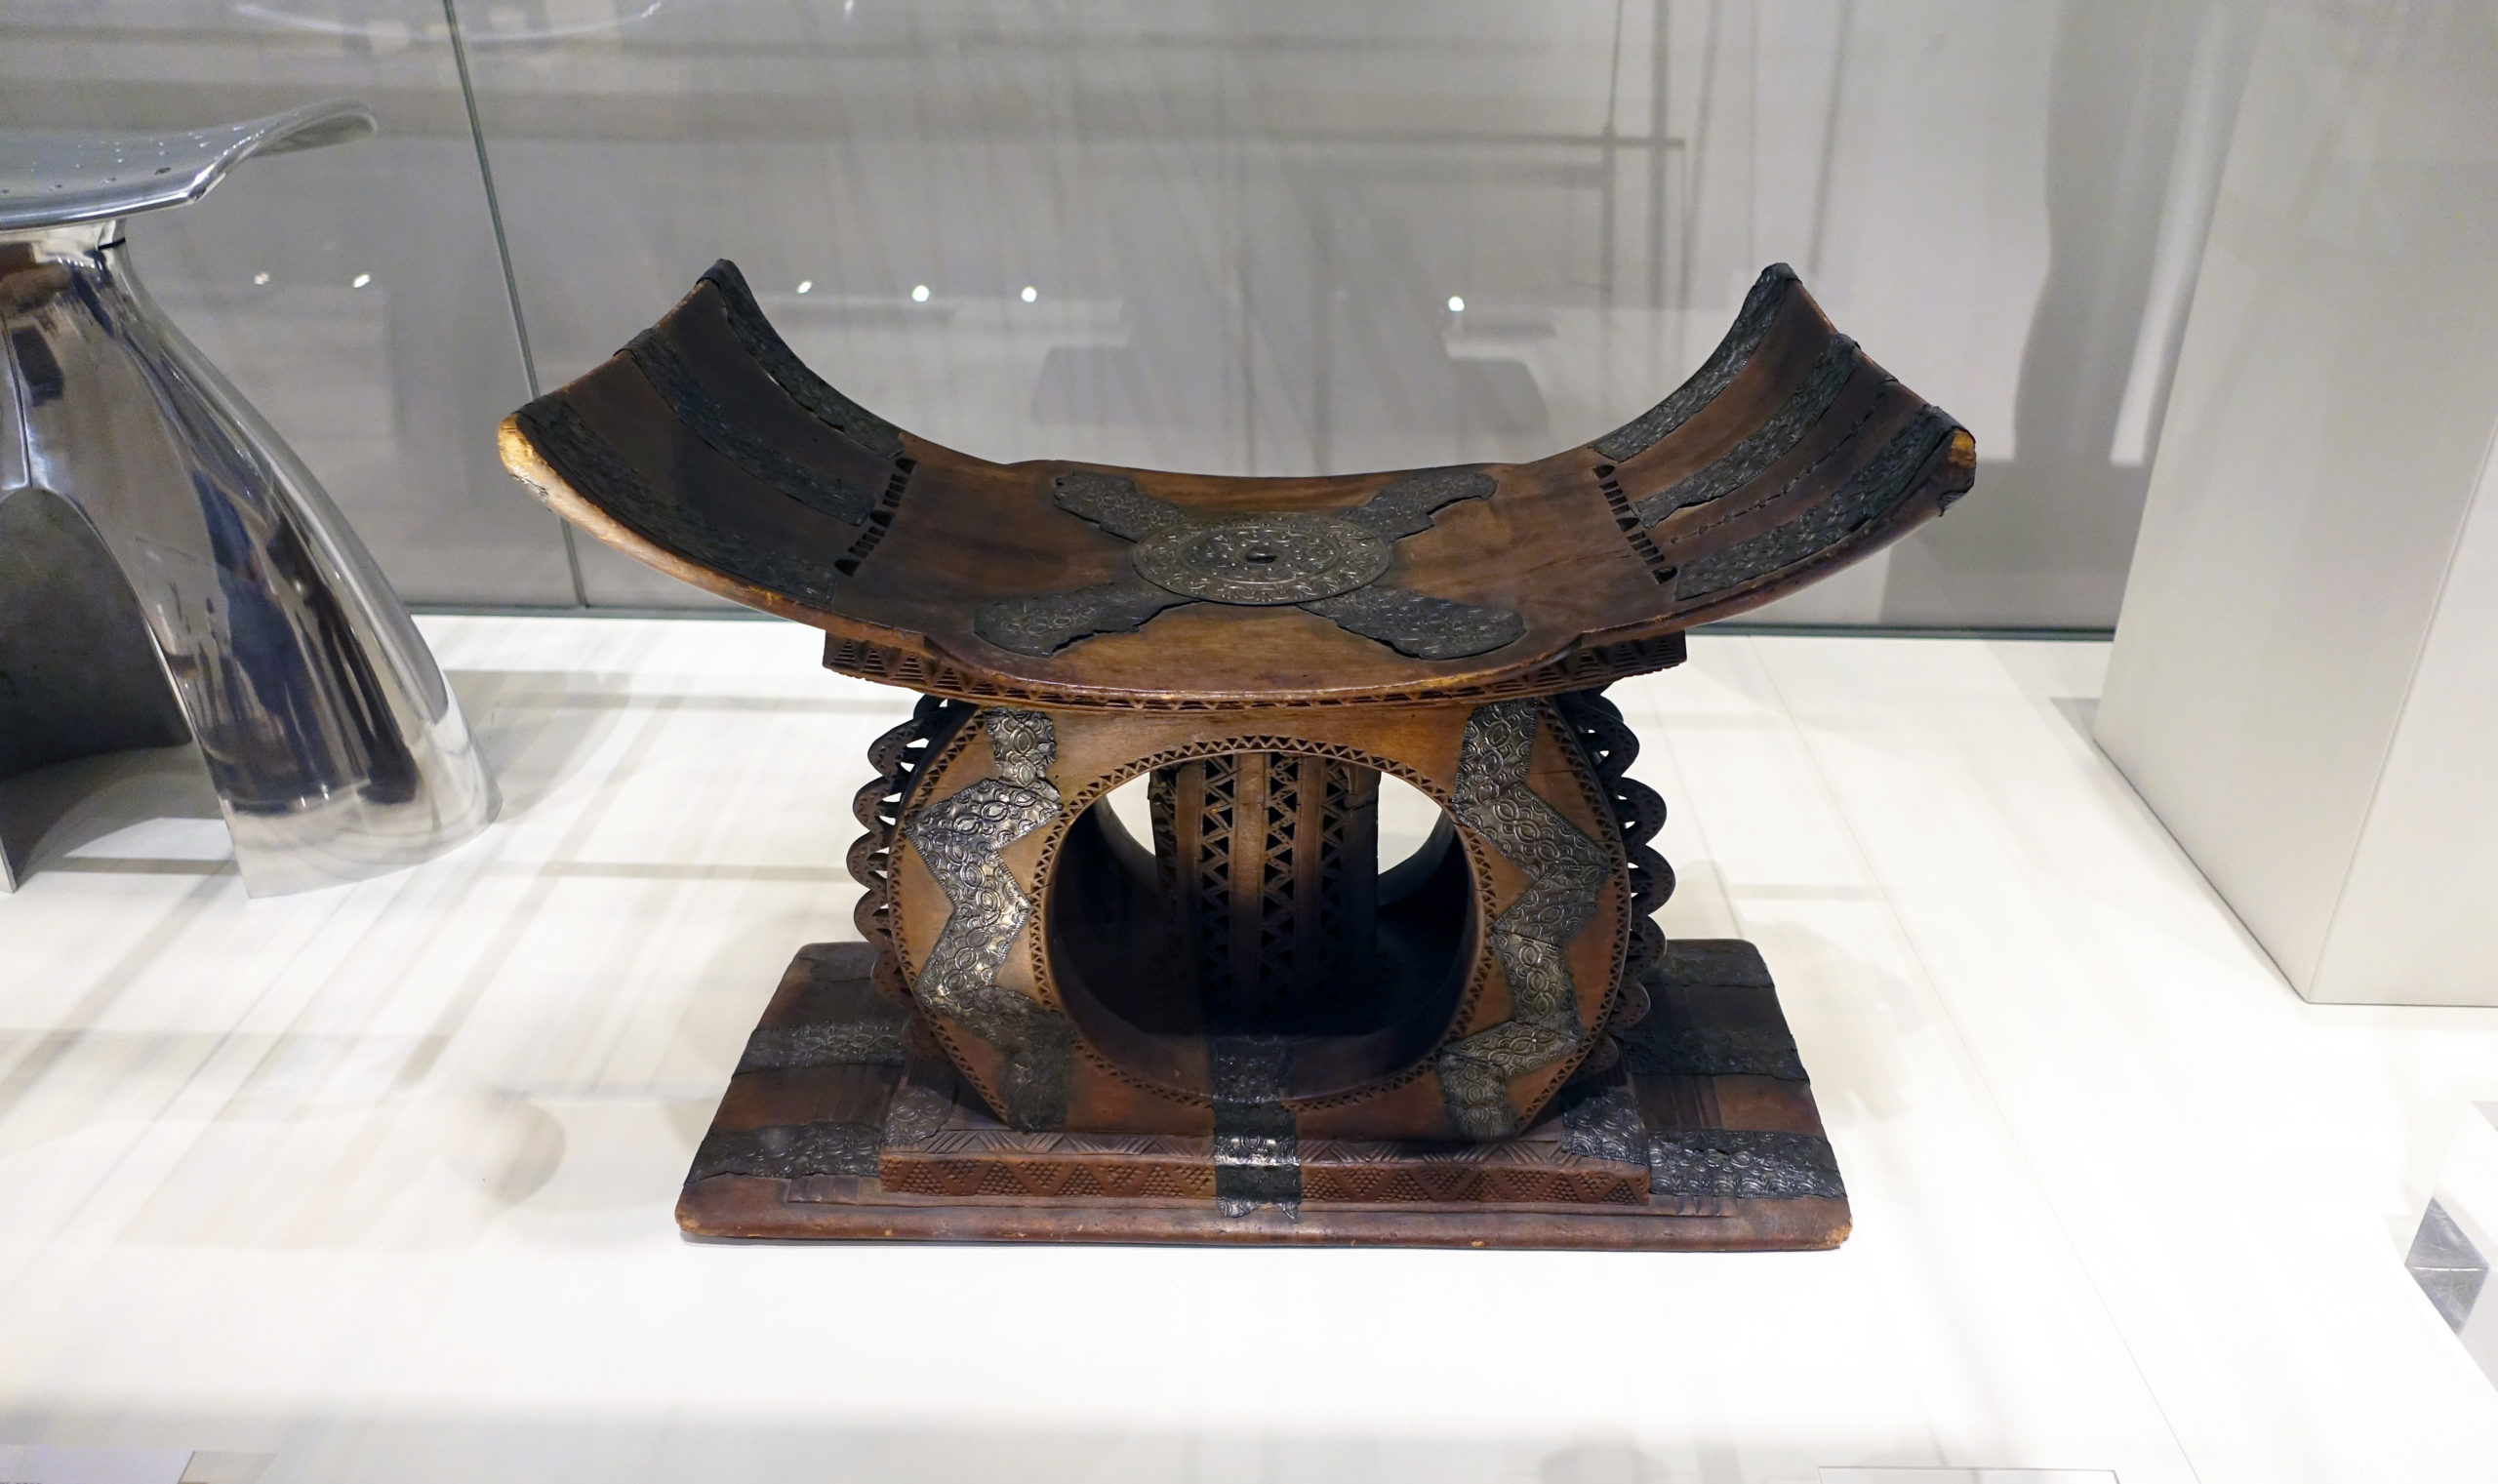 Wooden stool ornamented with silver, Asante people, Ghana, 19th century (Trustees of the British Museum)